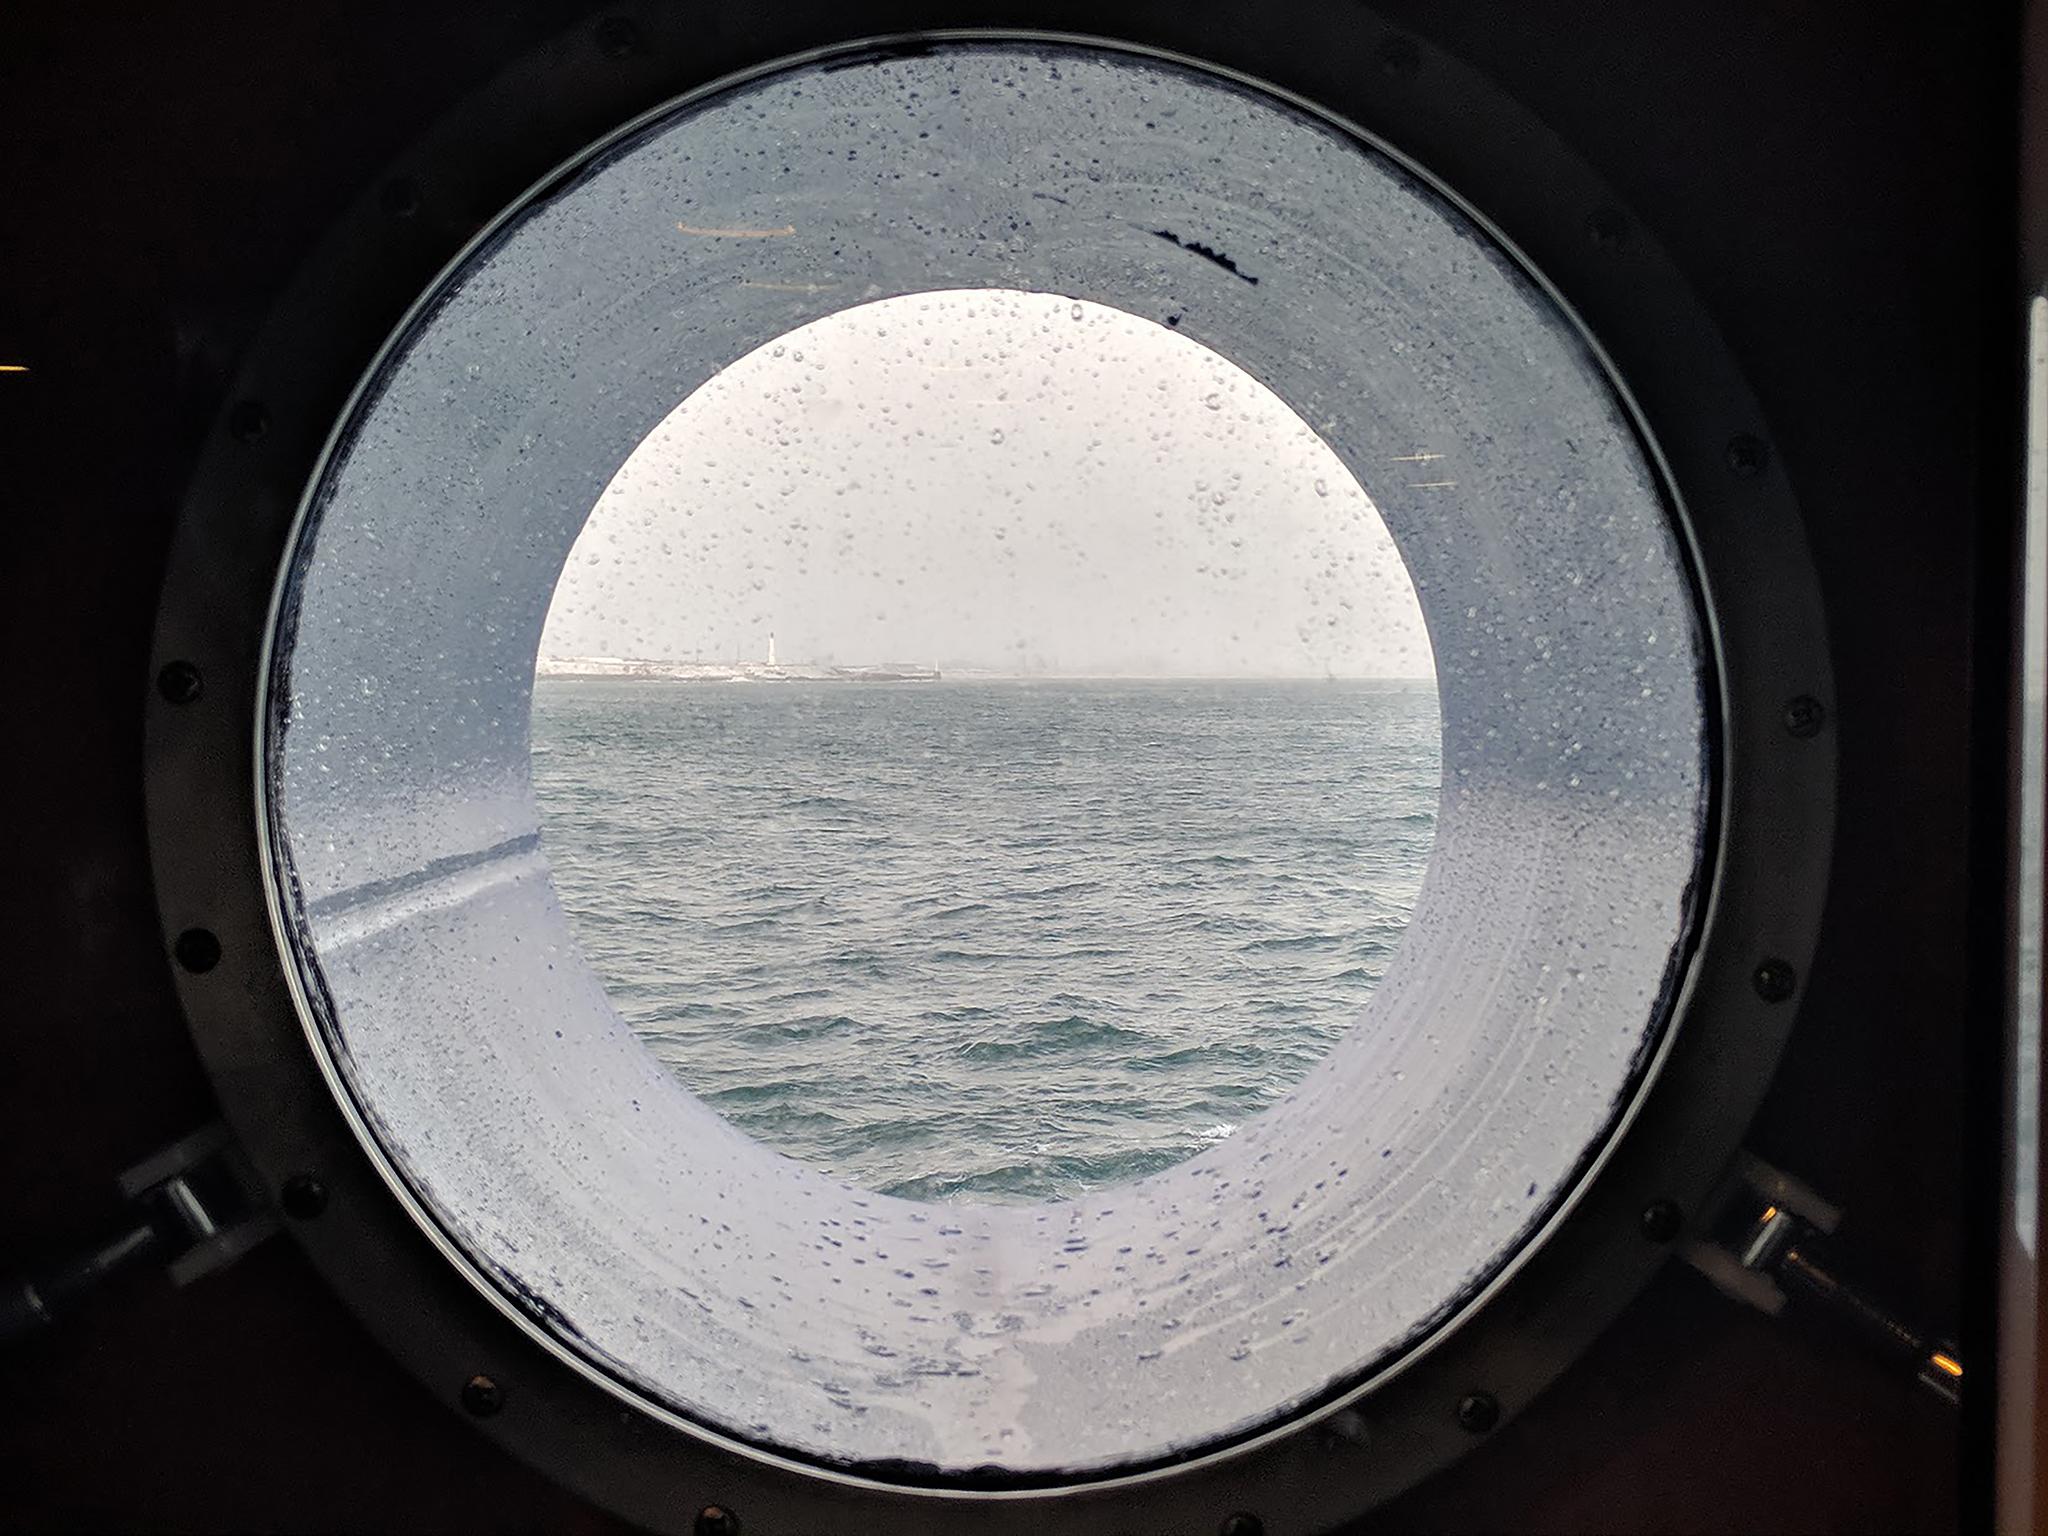 The view from inside the diving bell